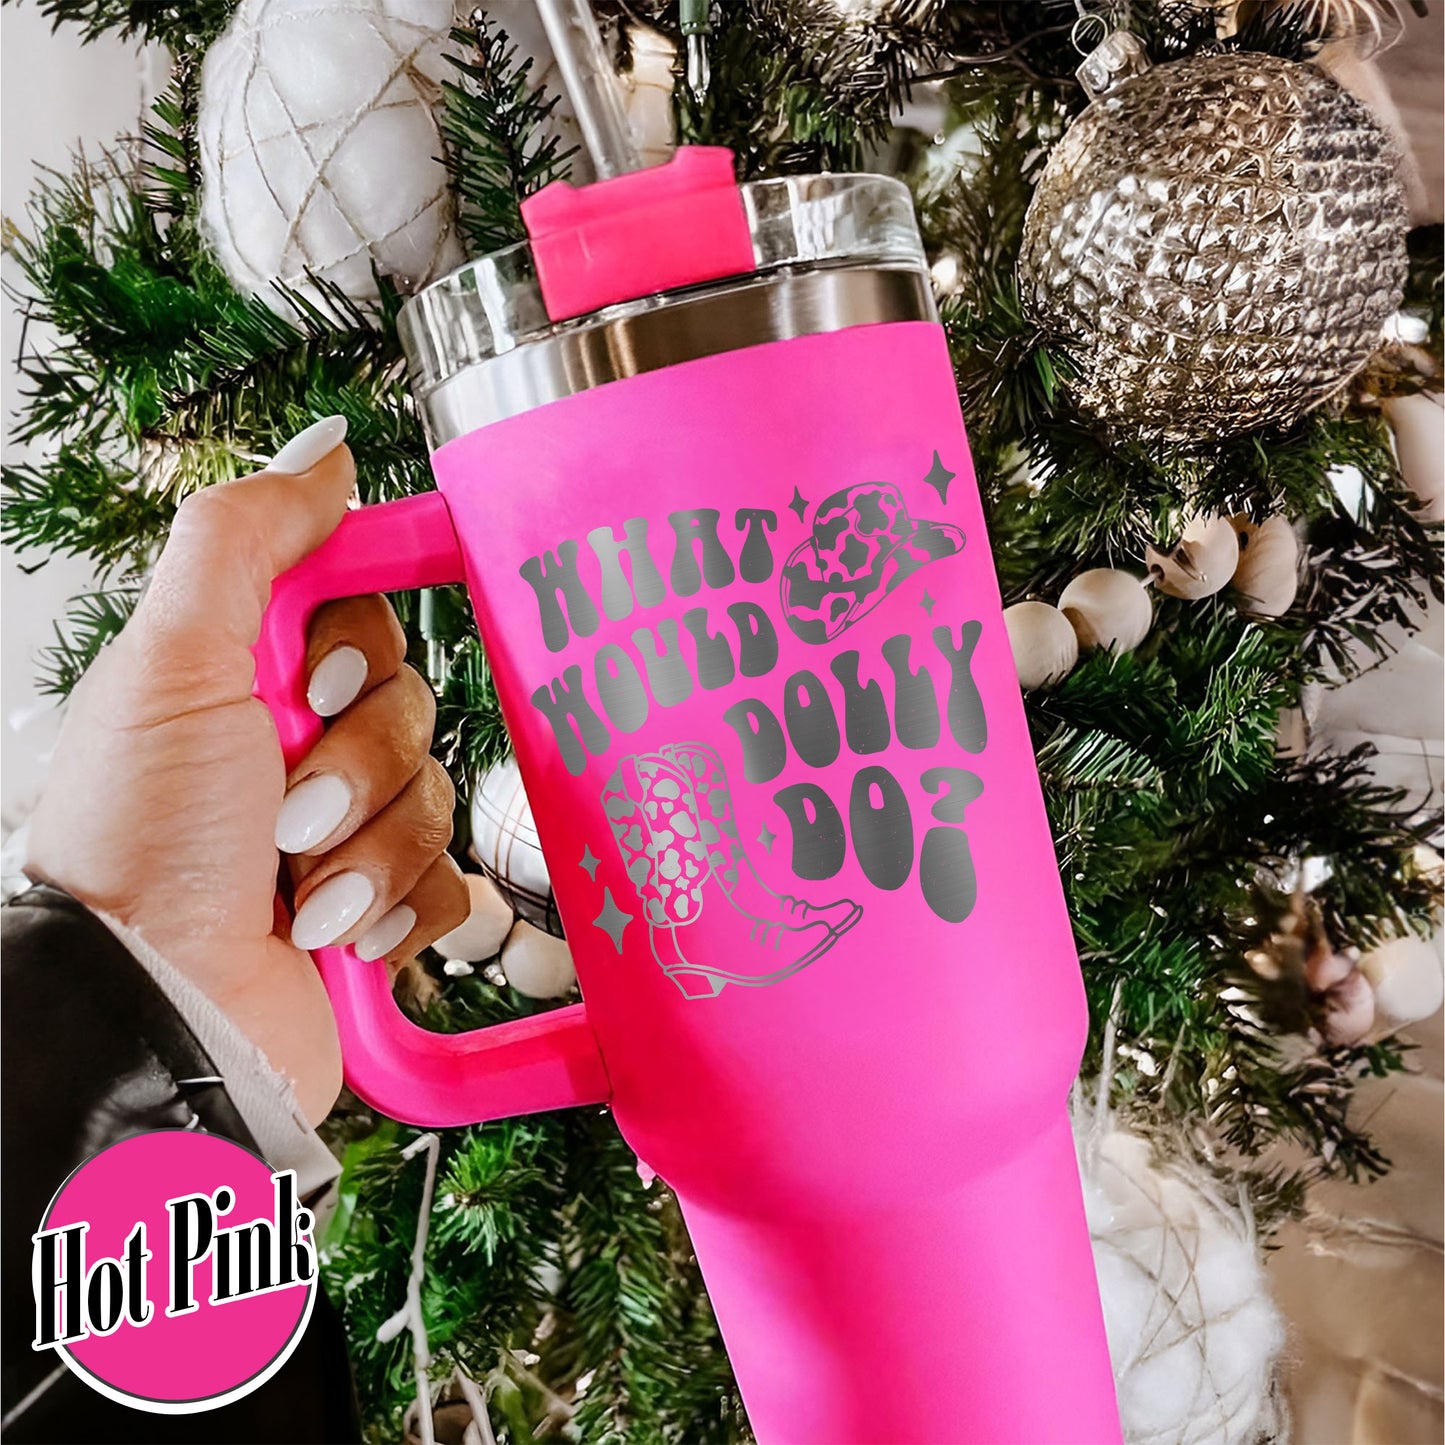 Tumblers 40oz With Dolly, Dolly Tumbler, Dolly Cowboys Tumbler With Handle, 40oz Tumbler Engraved, 40oz Tumbler With Handle, Holiday Gift